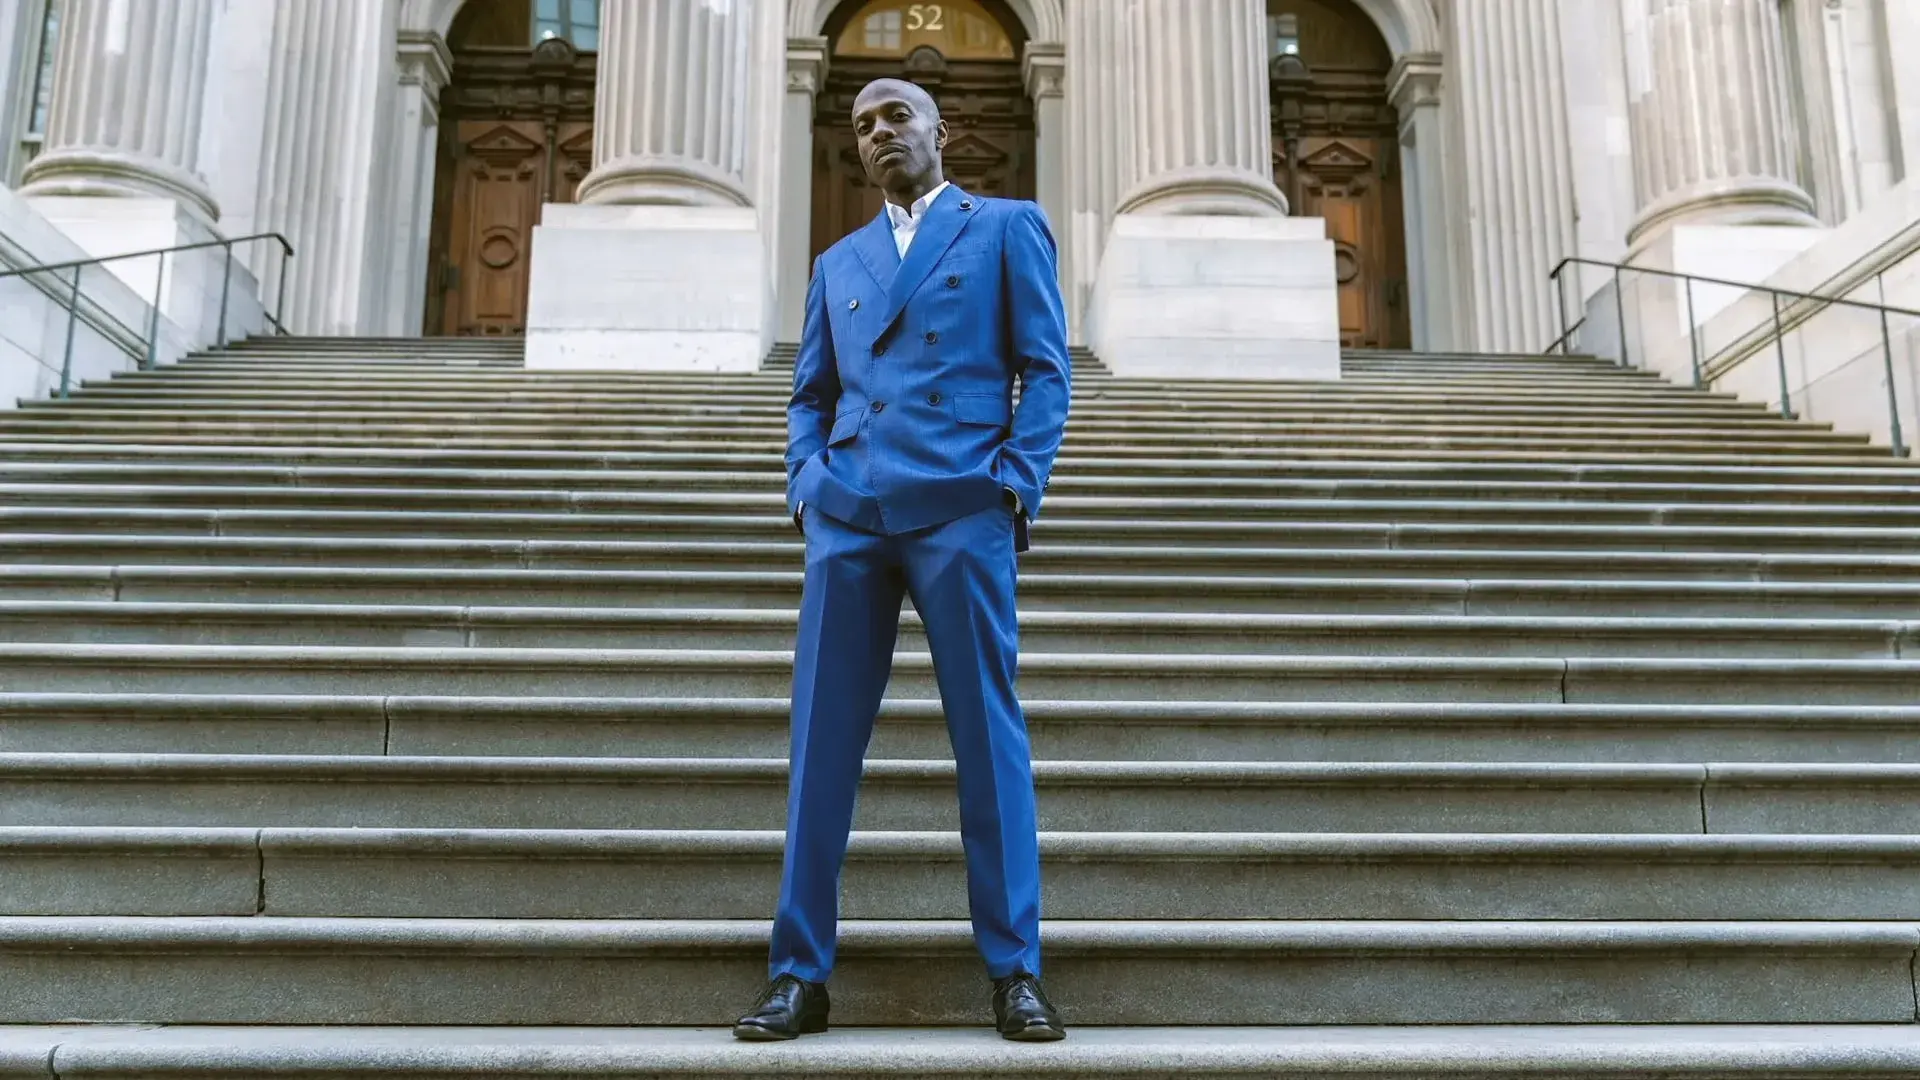 HipHoppreneur Founder and CEO Cedric Muhammad standing confidently on staircase in front of government building.